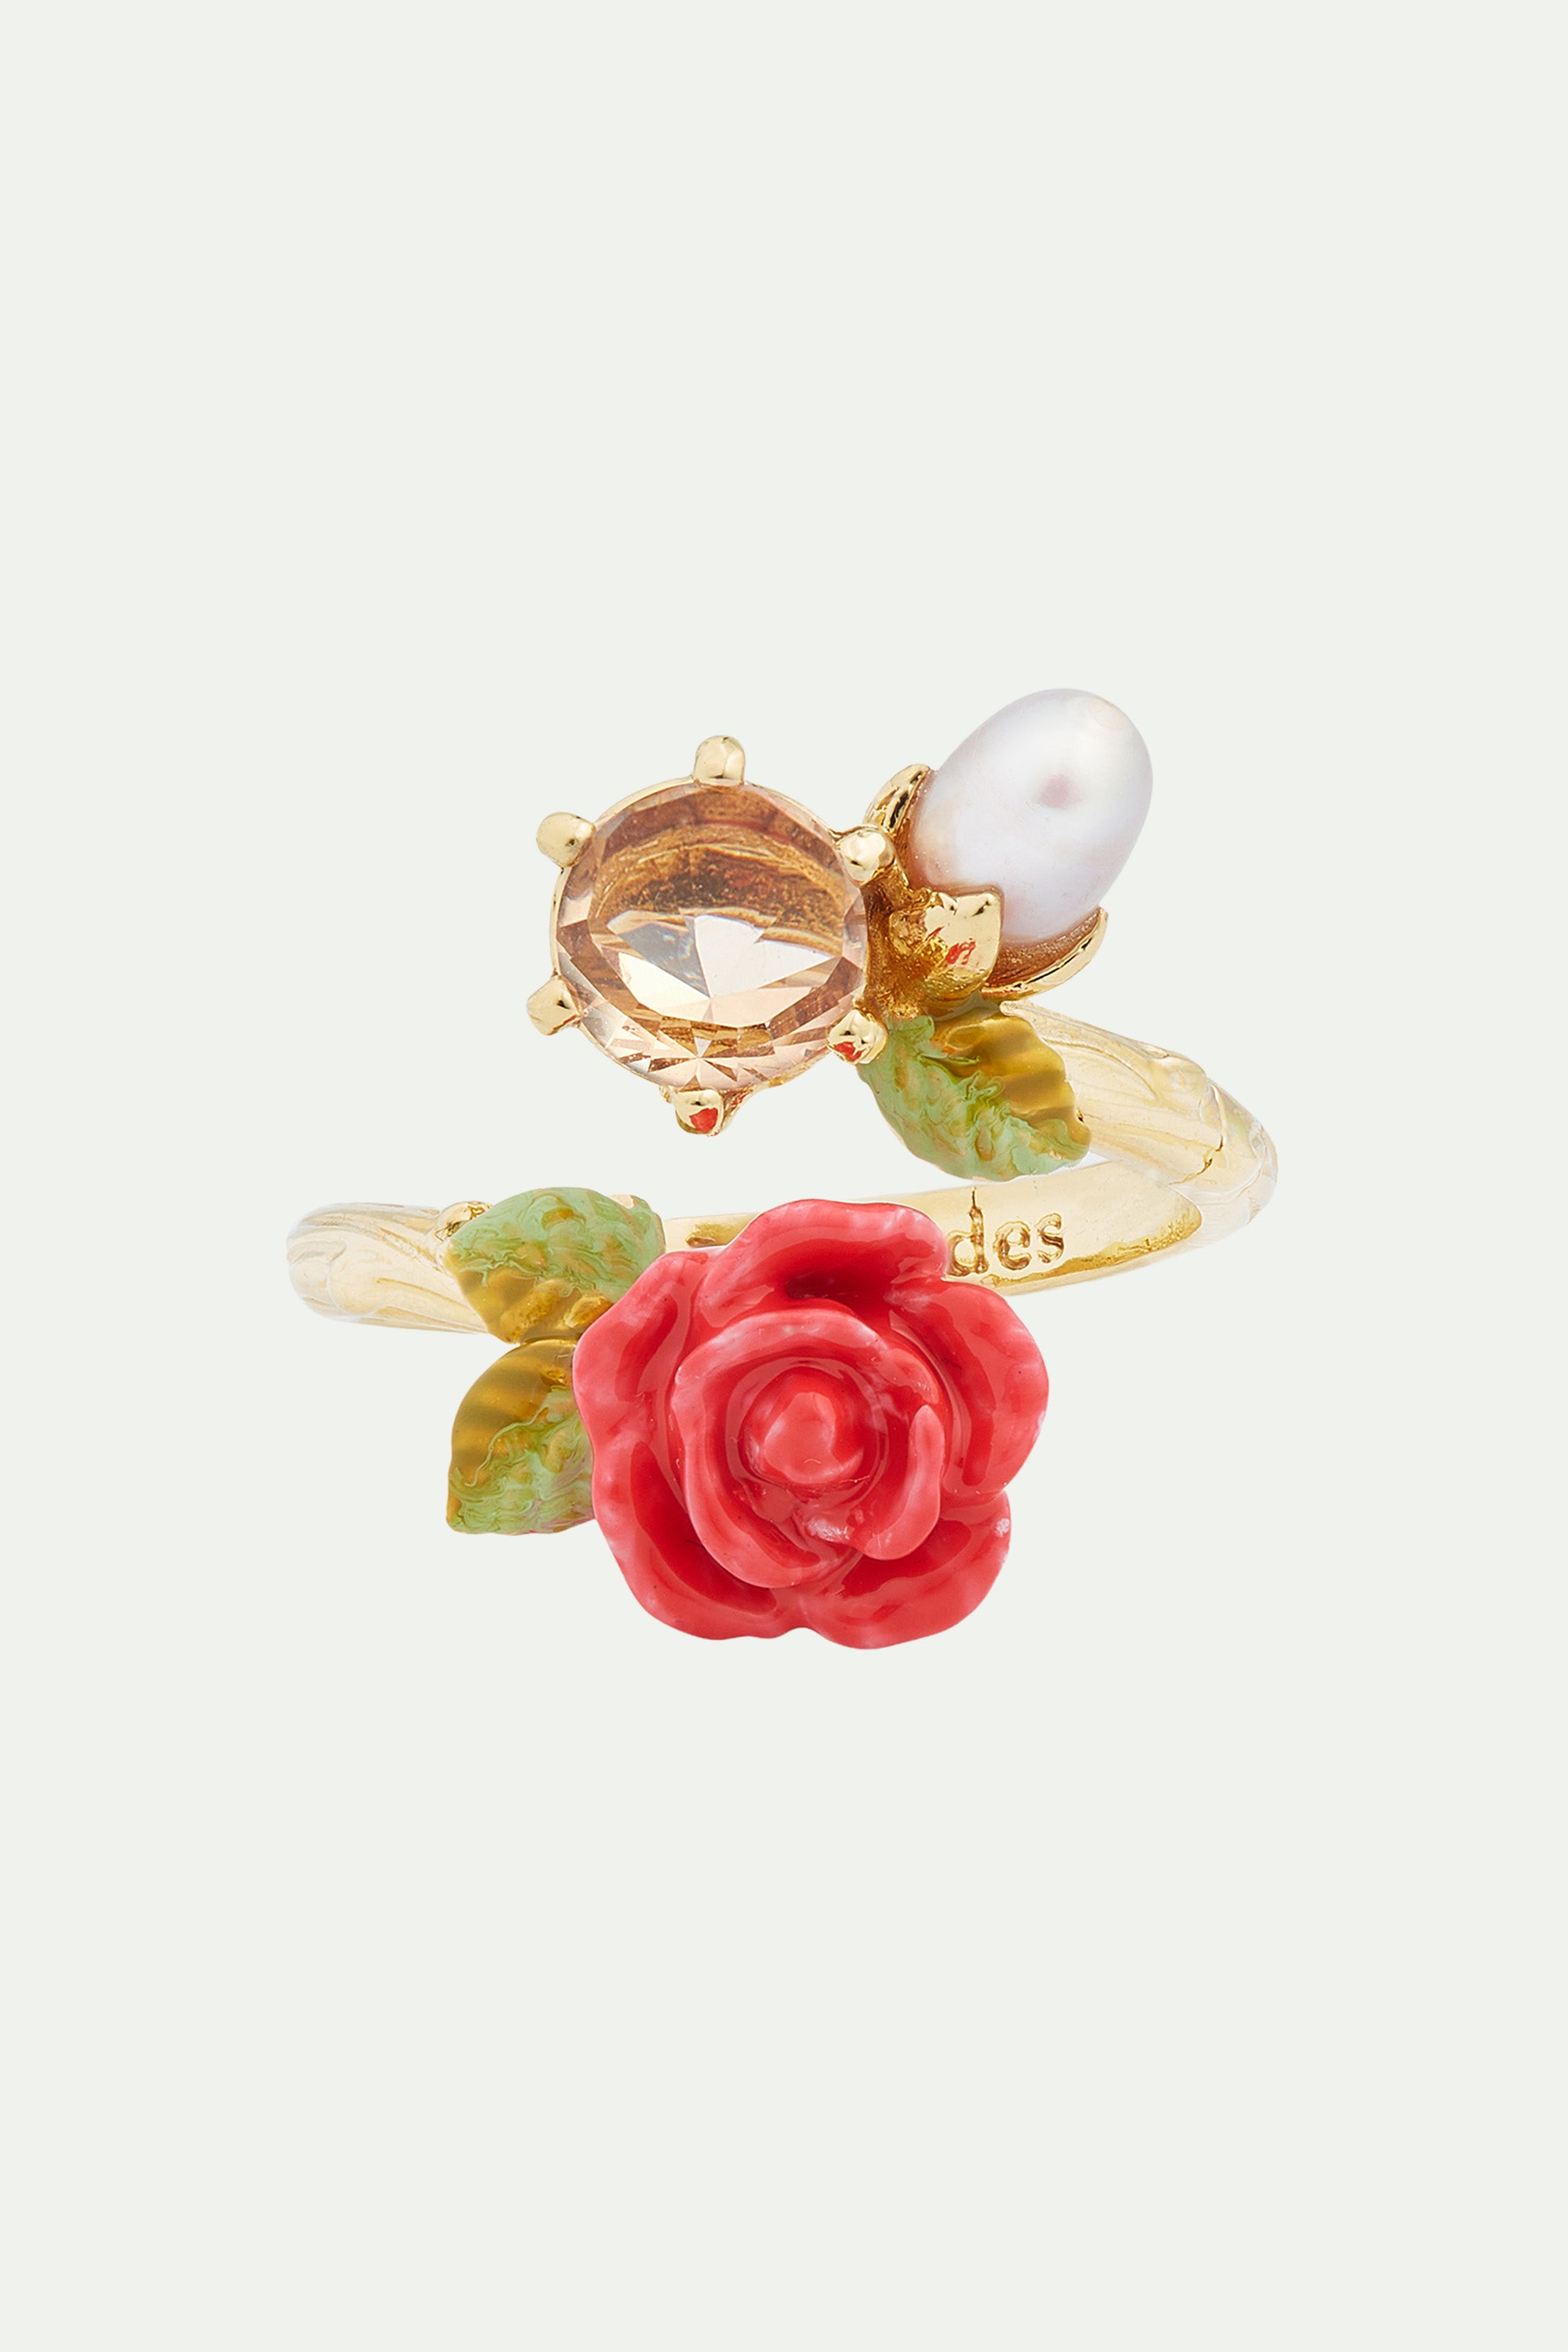 Rose, cultured pearl and stone adjustable ring